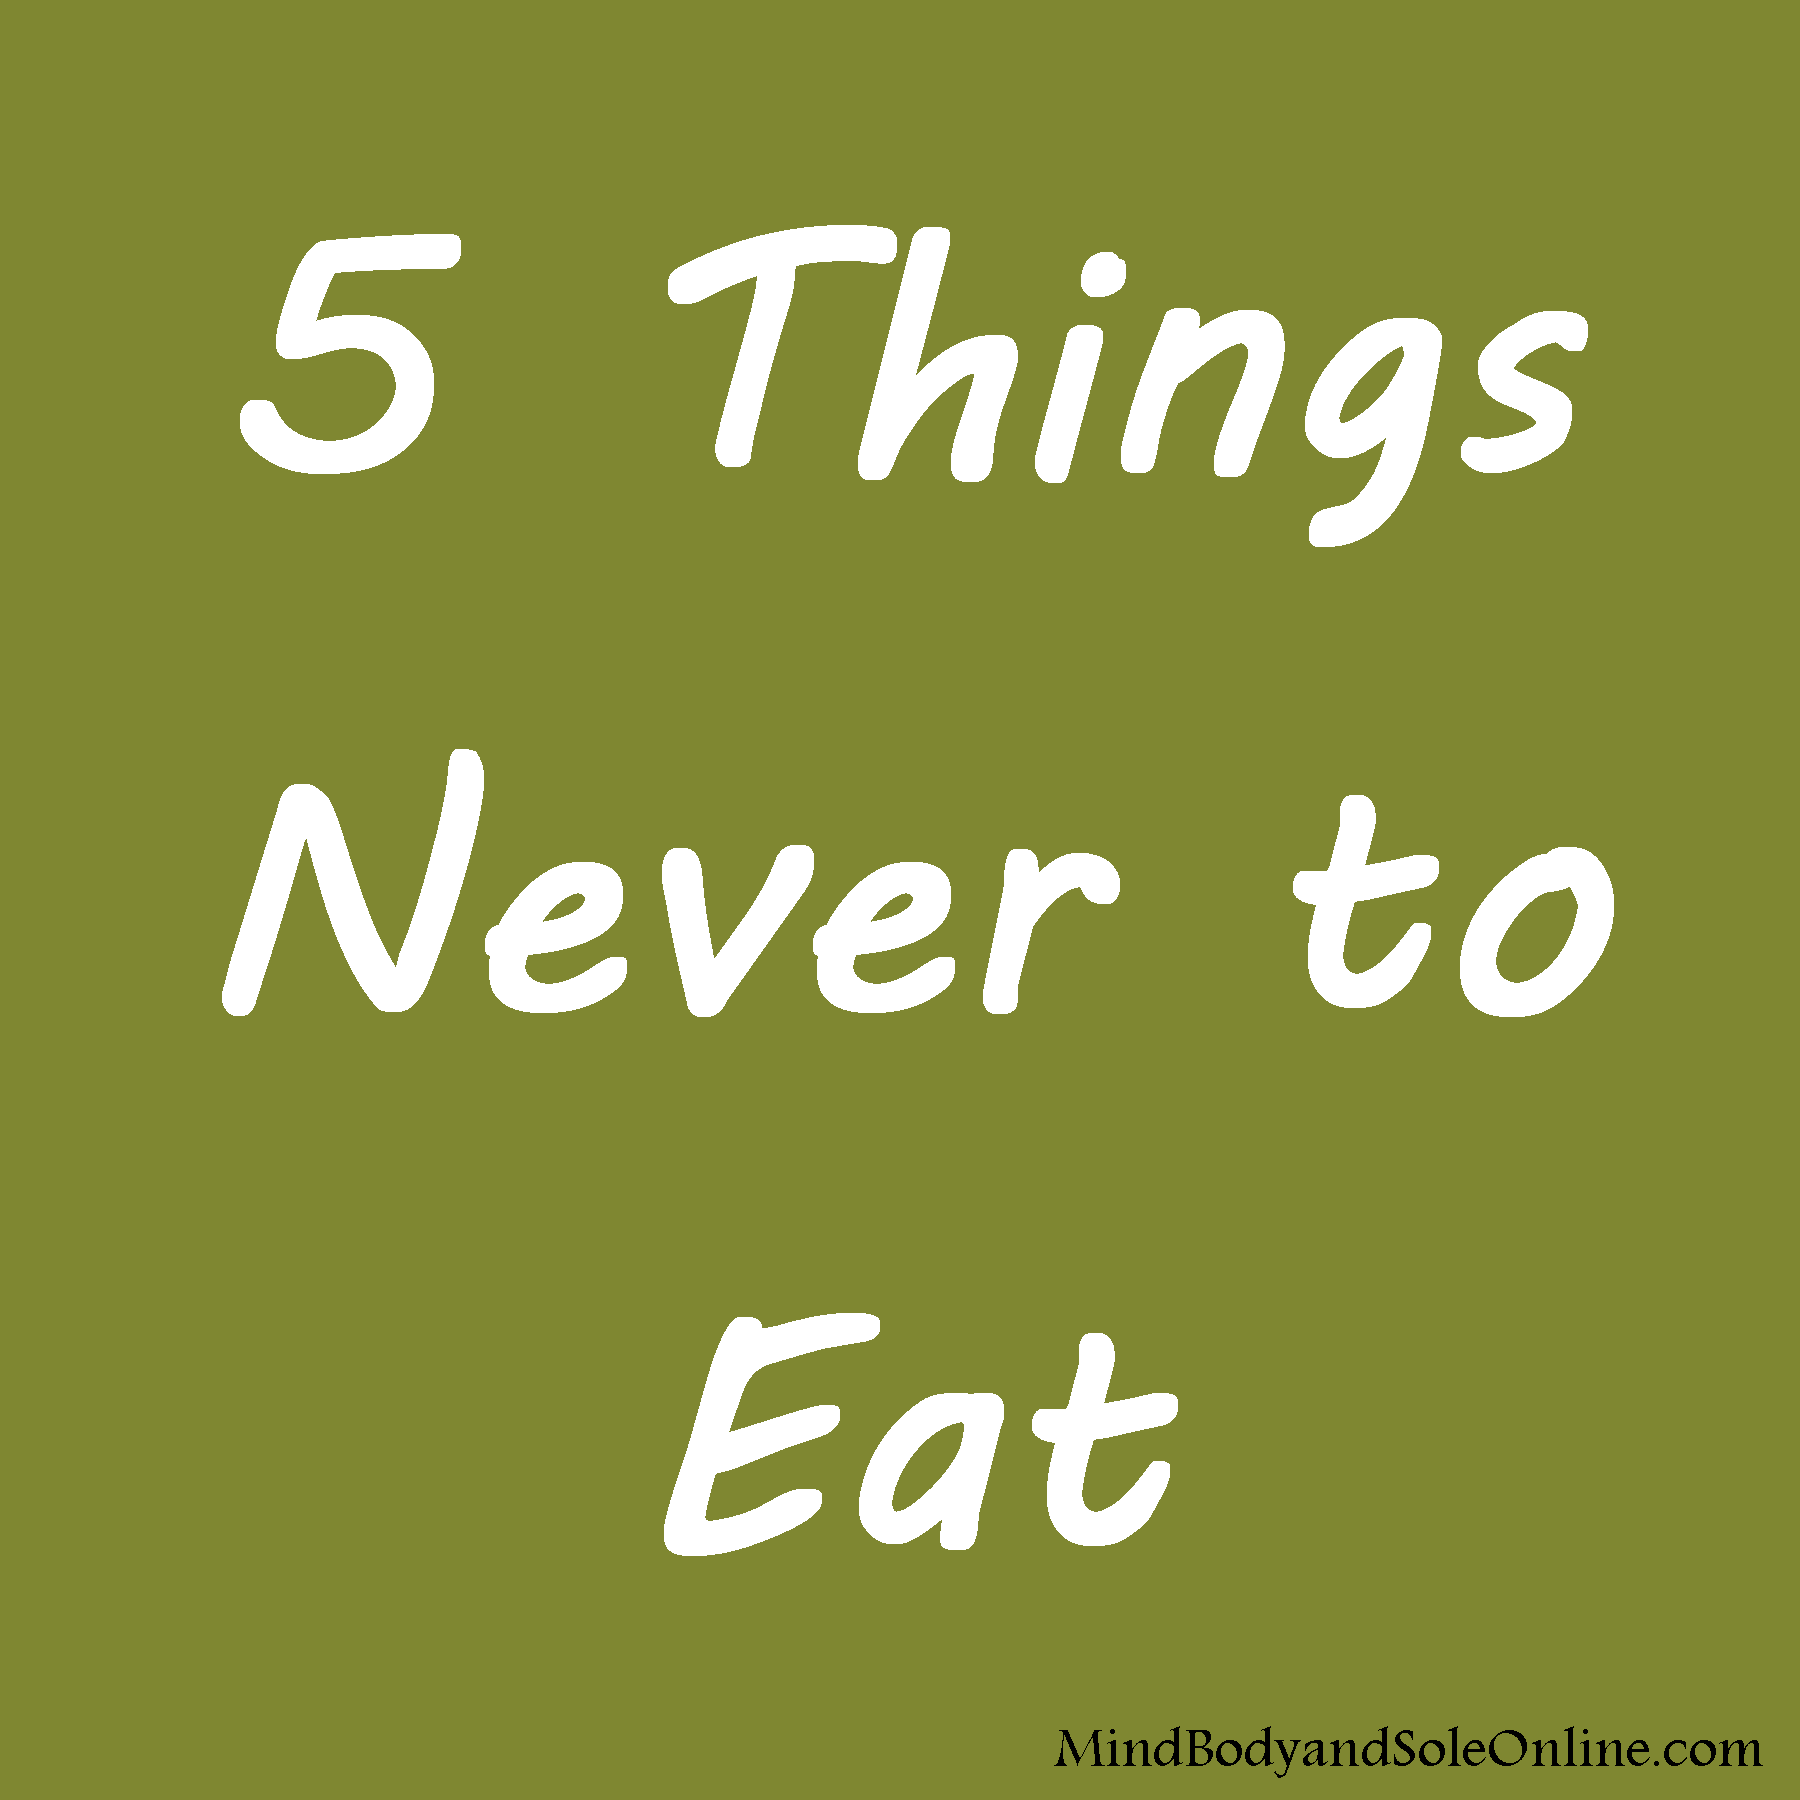 5 Things Never to Eat